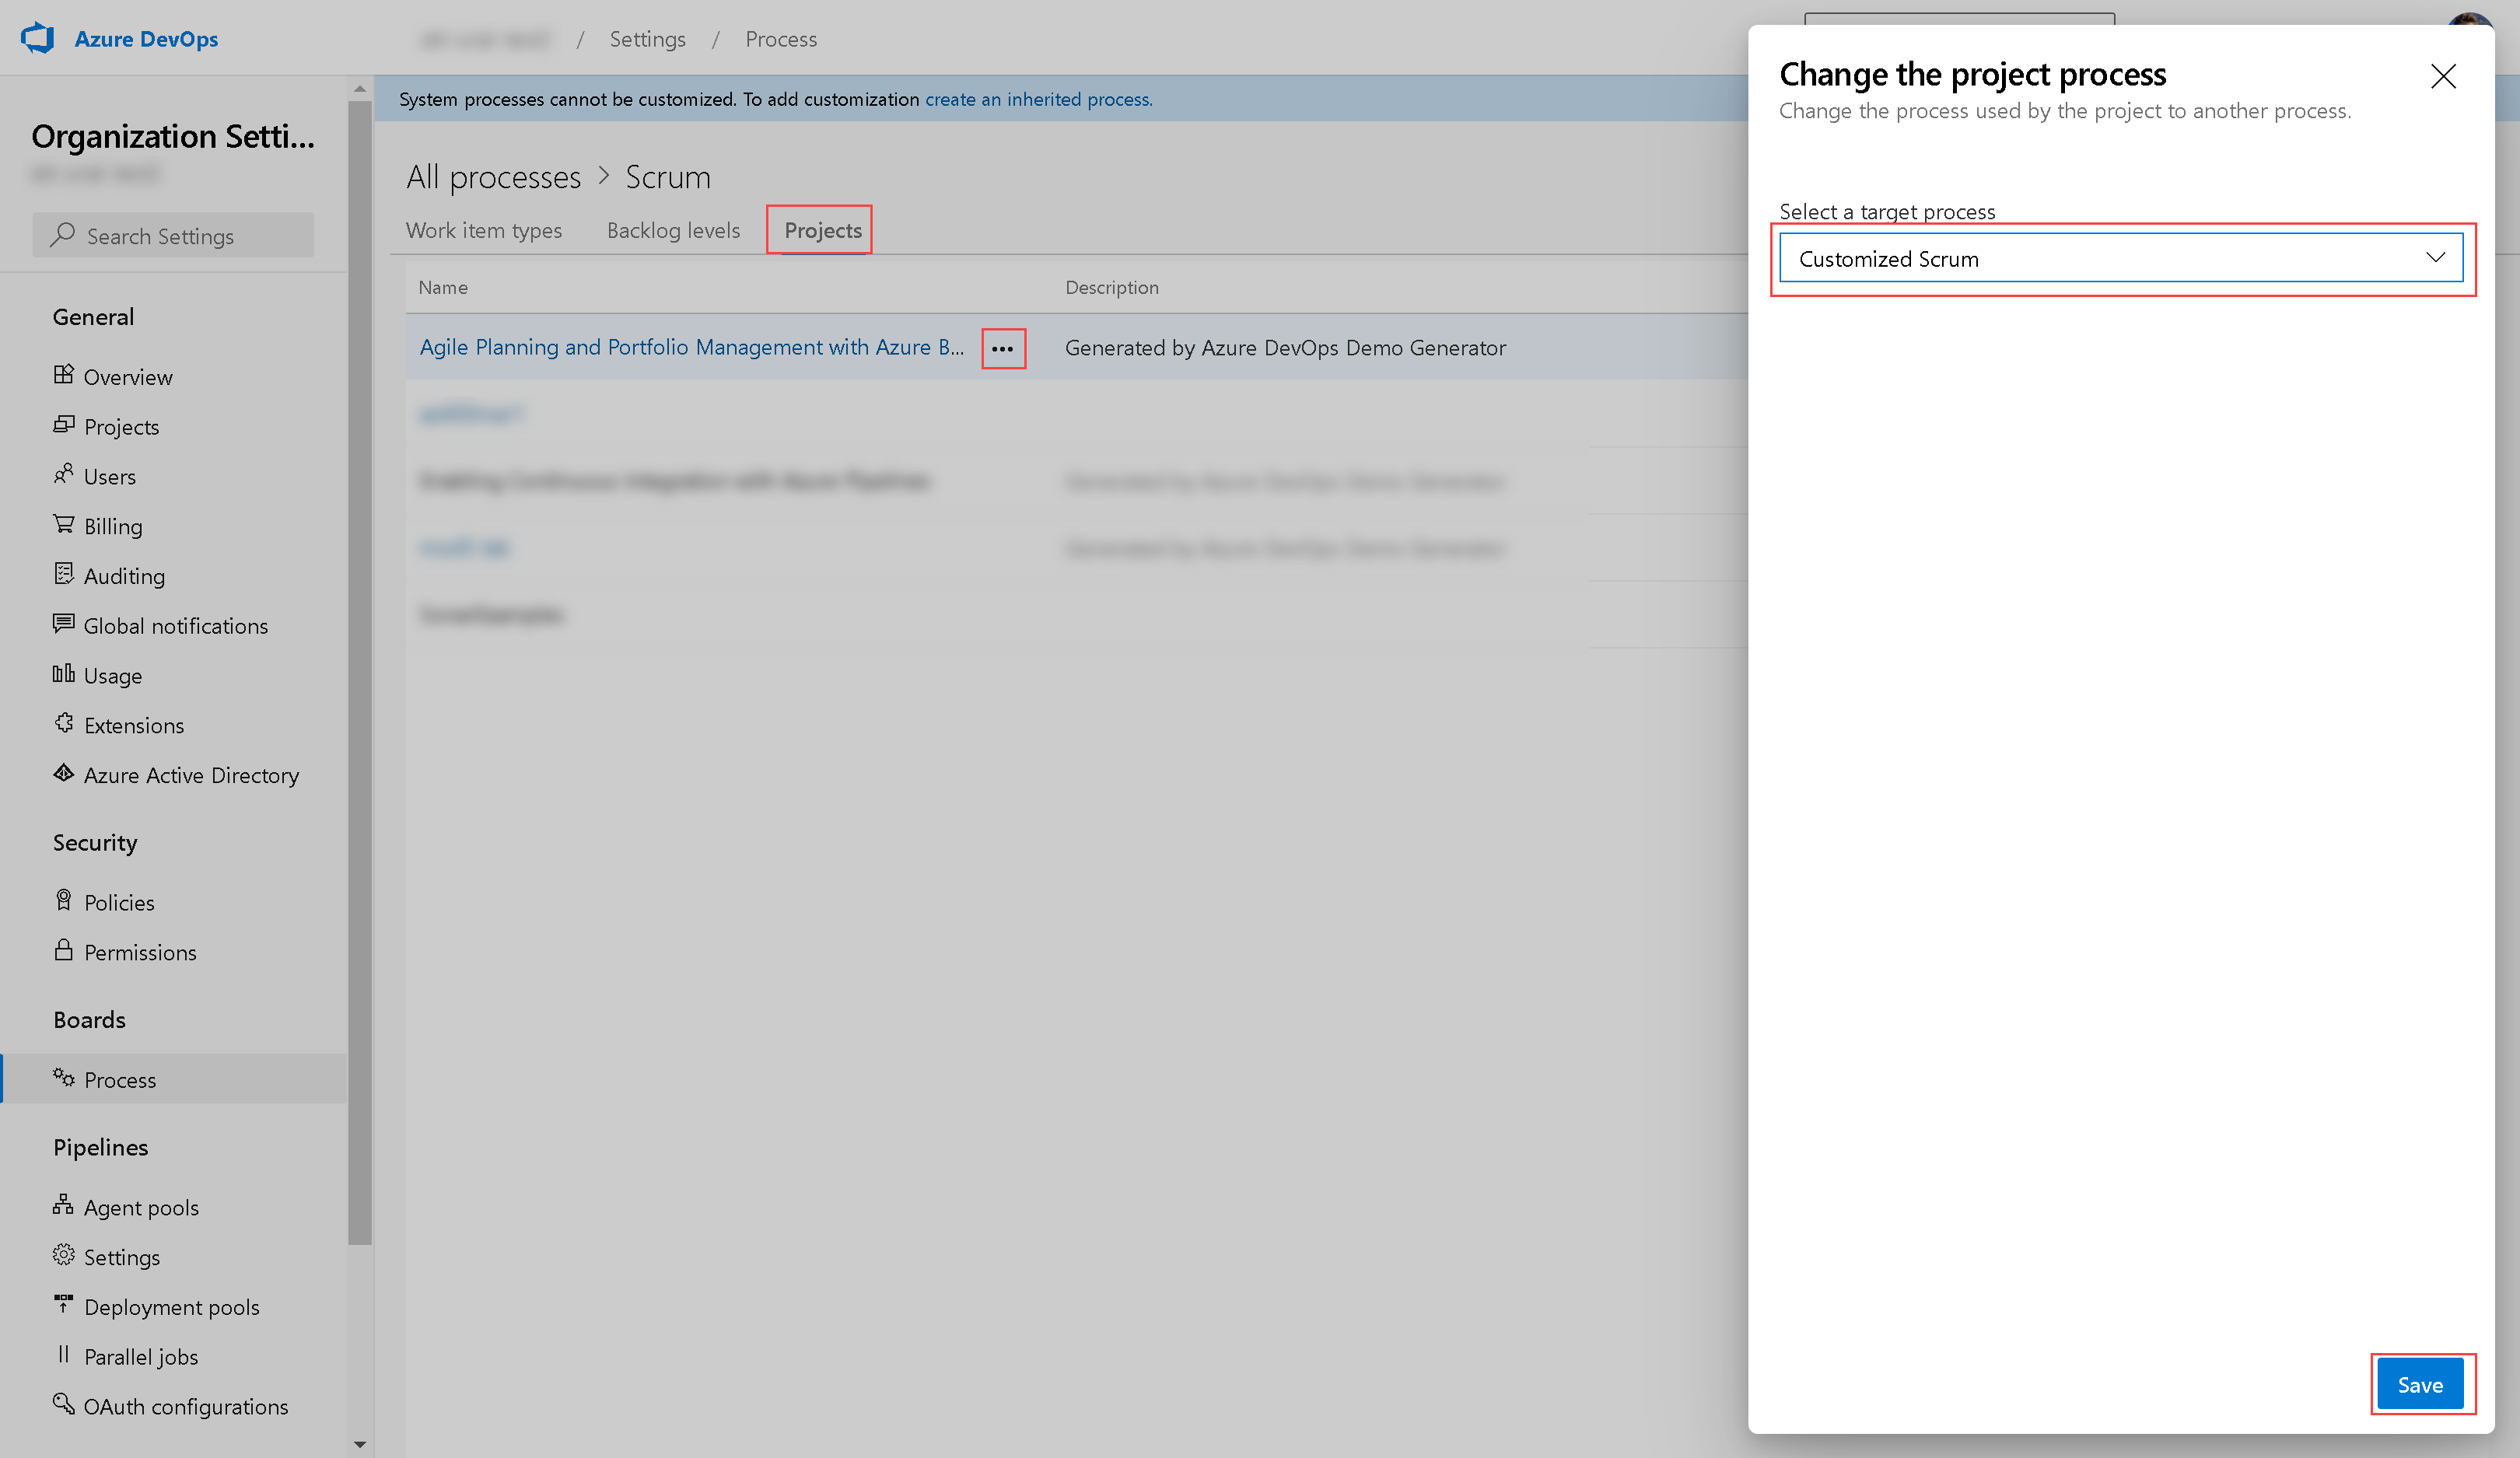 On the "Change the project process" pane, in the "Select a target process"
dropdown list, select the "Customized Scrum" process, click "Save" and then
click "Close"